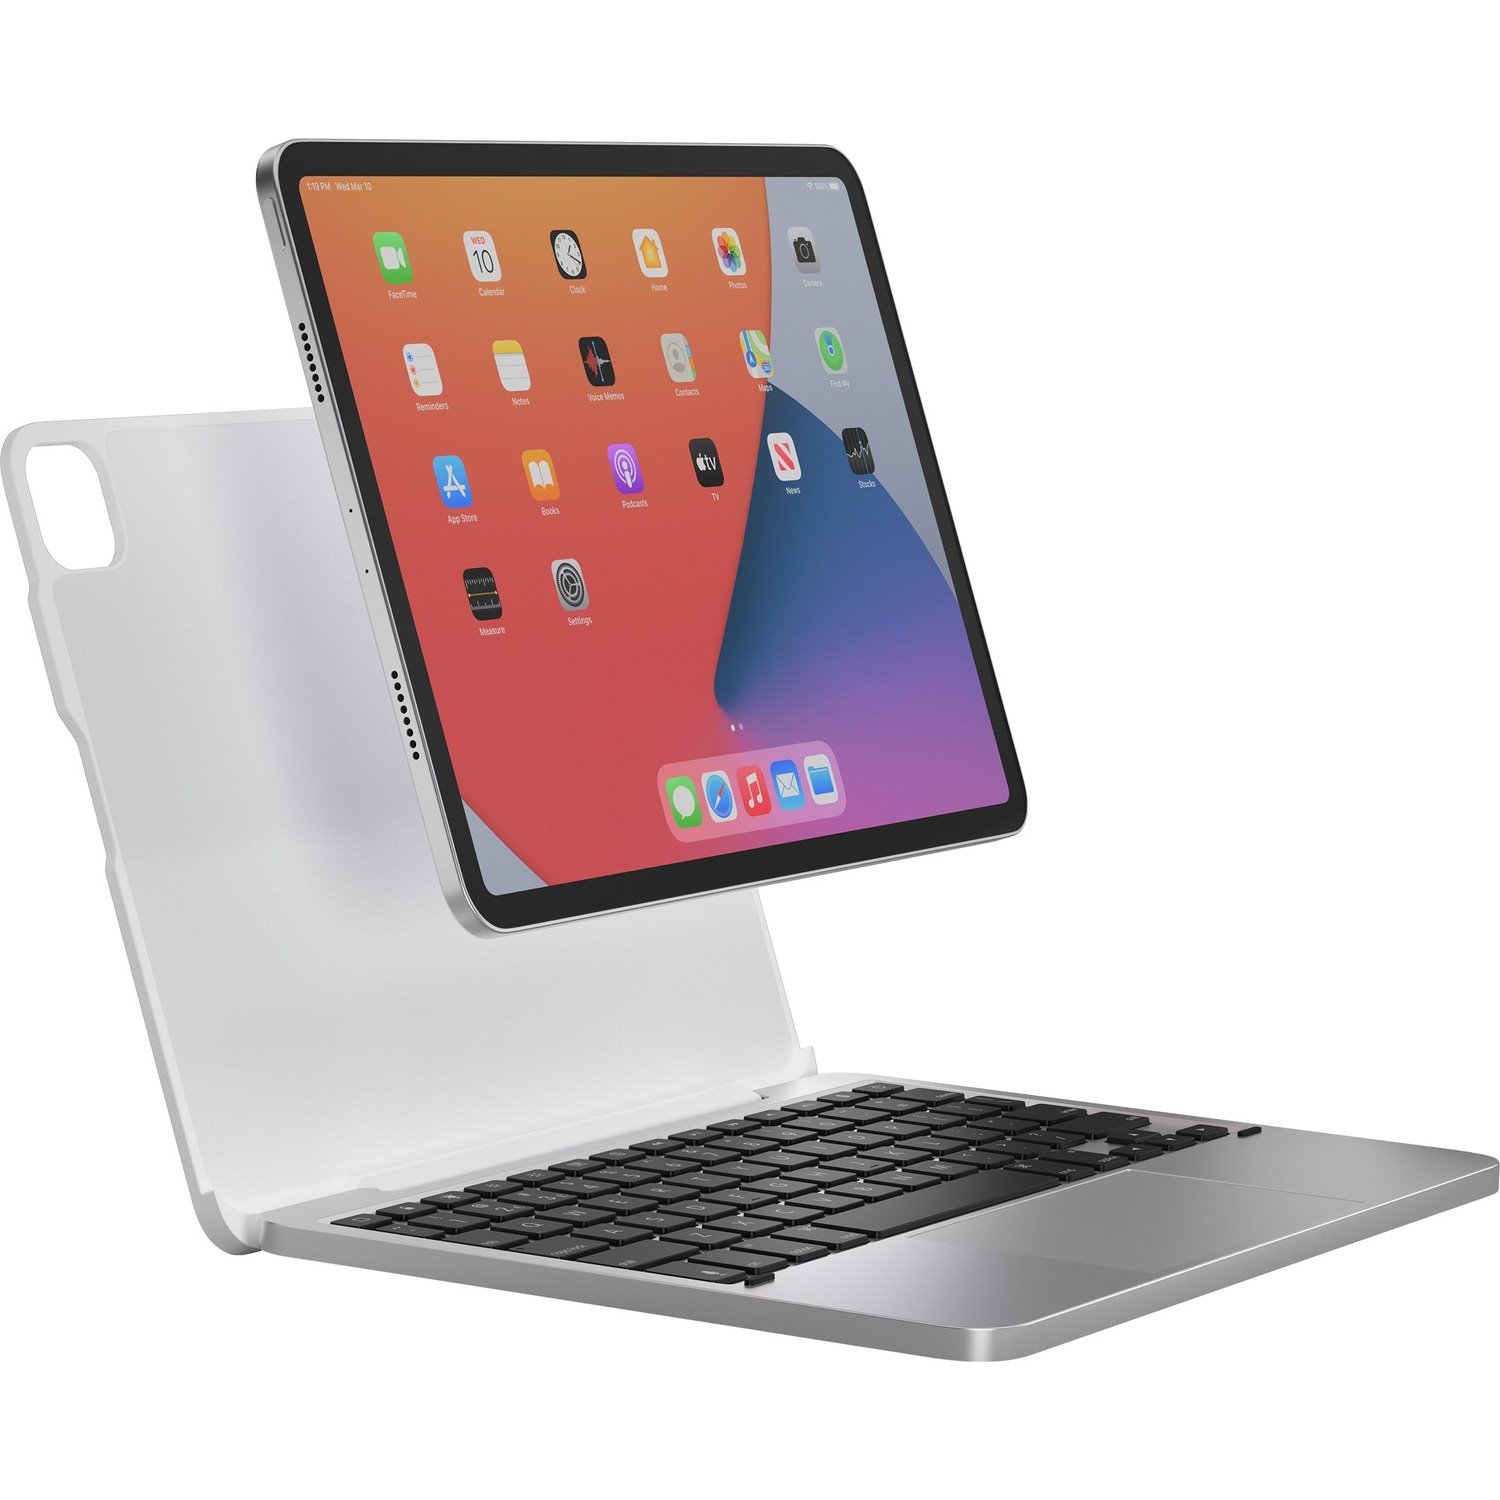 Brydge MAX+ BRY4033 Keyboard/Cover Case for 27.9 cm (11") Apple iPad Pro, iPad Pro (2nd Generation), iPad Pro (3rd Generation), iPad Air (4th Generation), iPad Pro (4th Generation) Tablet - White